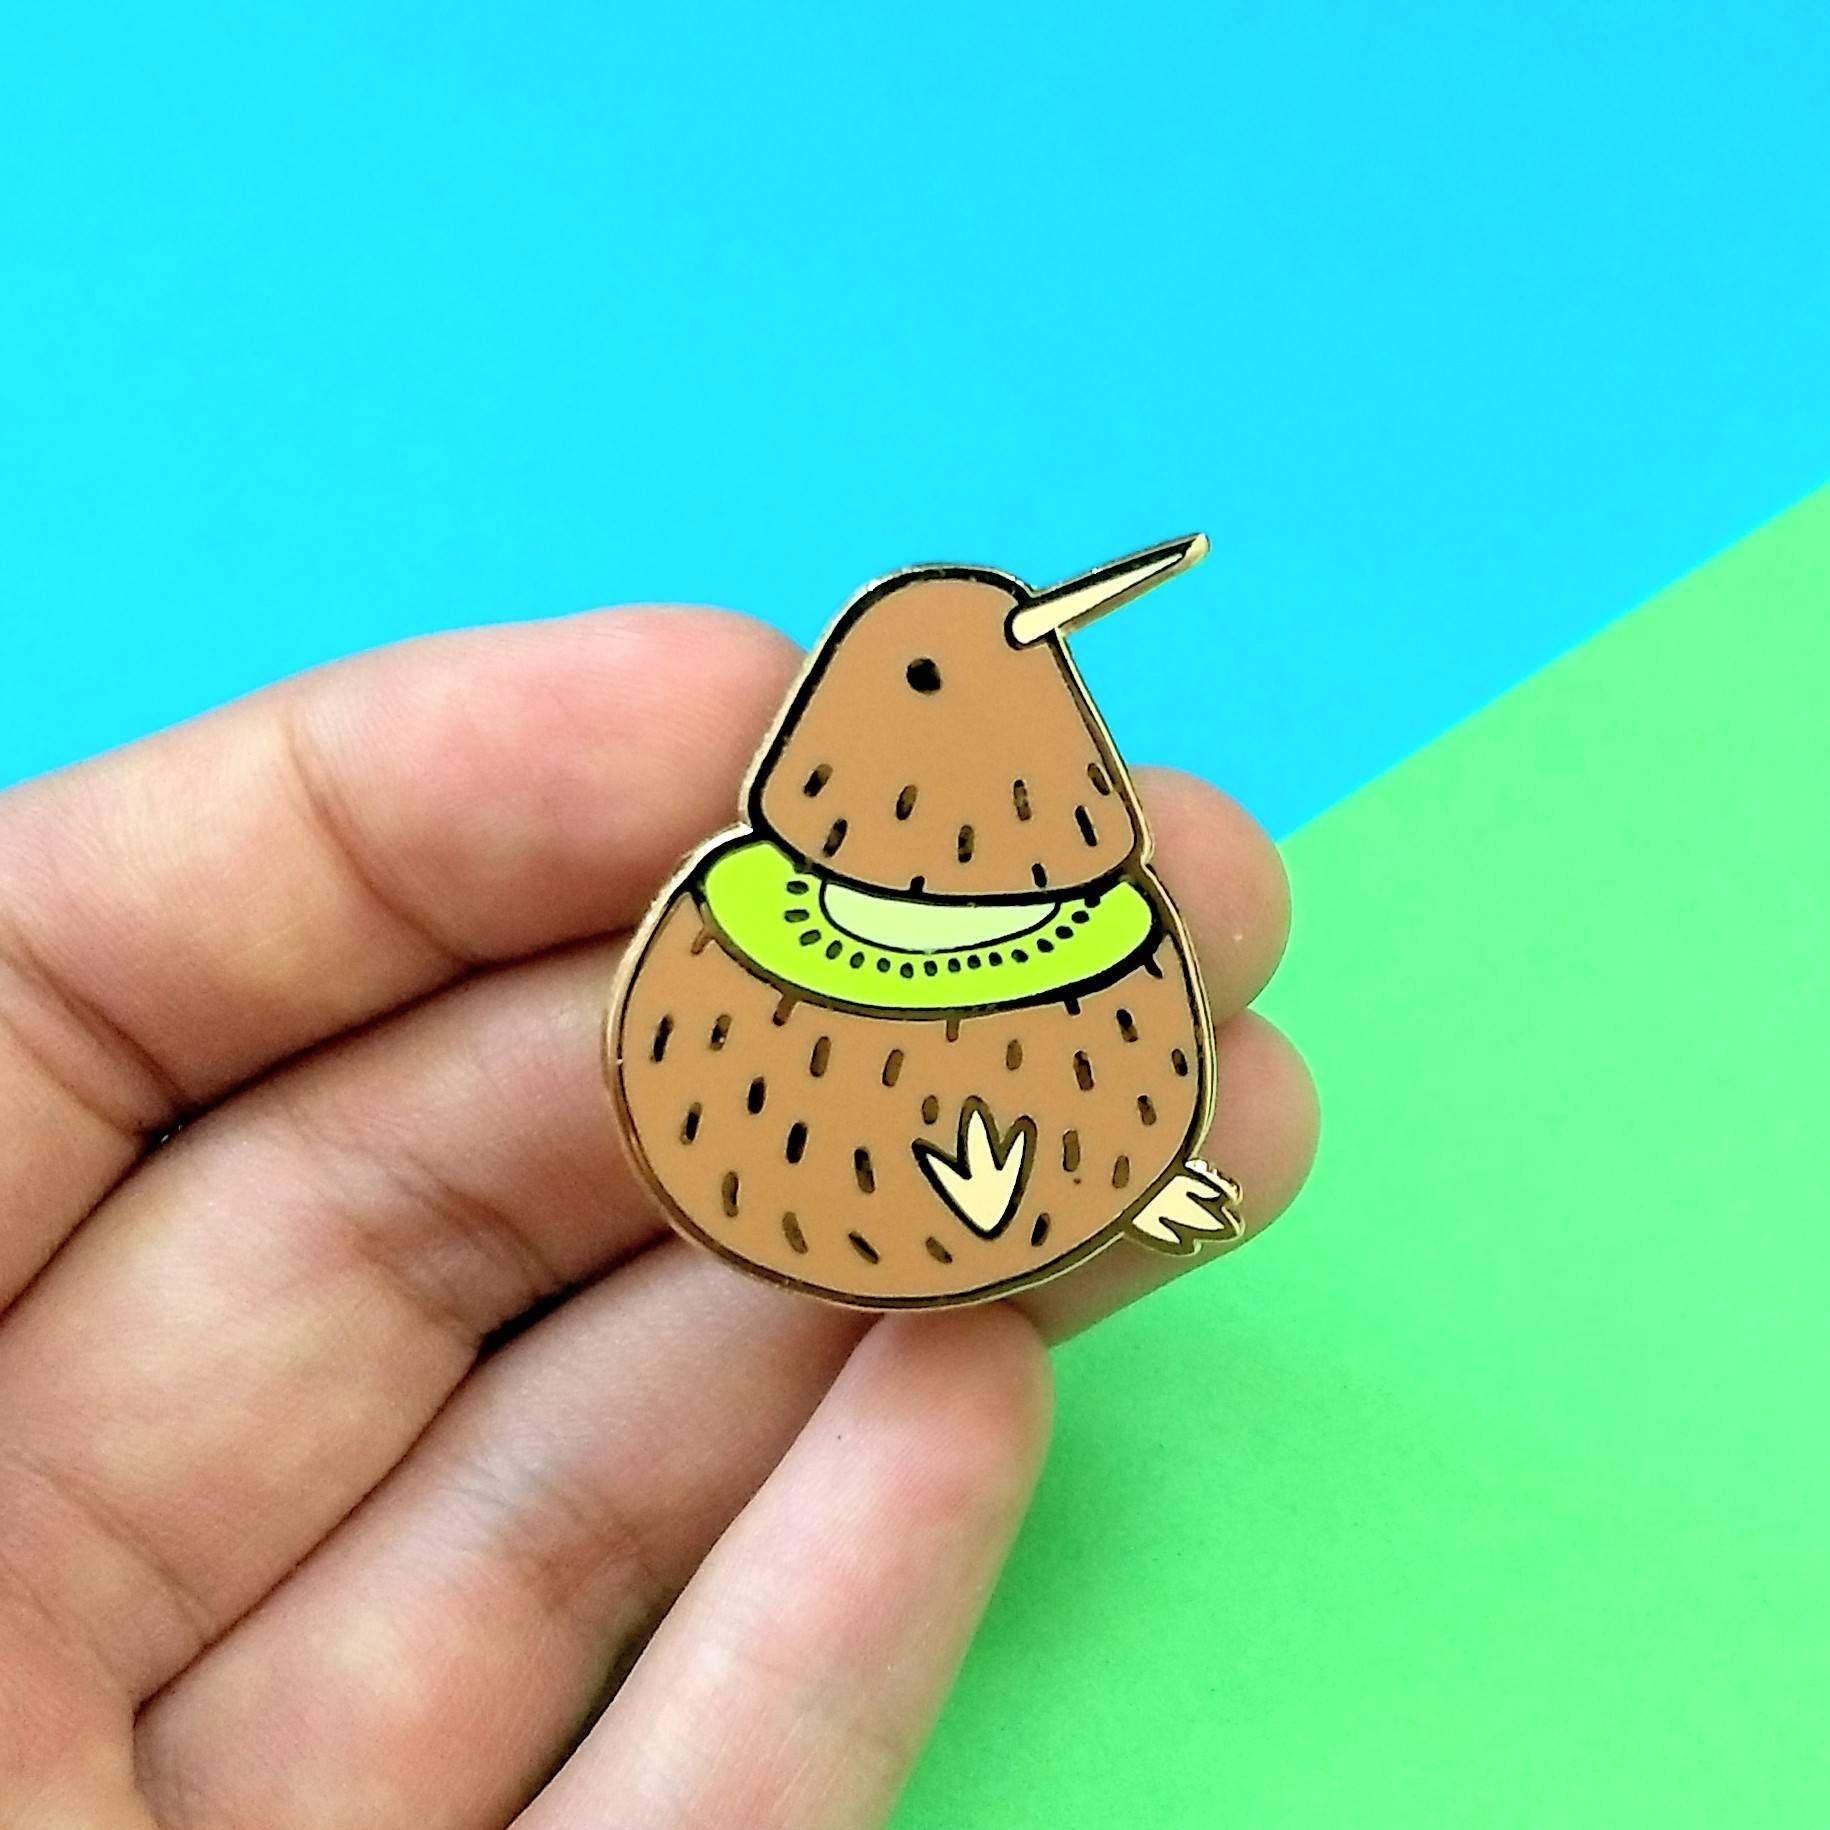 pin of a kiwi bird with a slice showing the inside is kiwi fruit